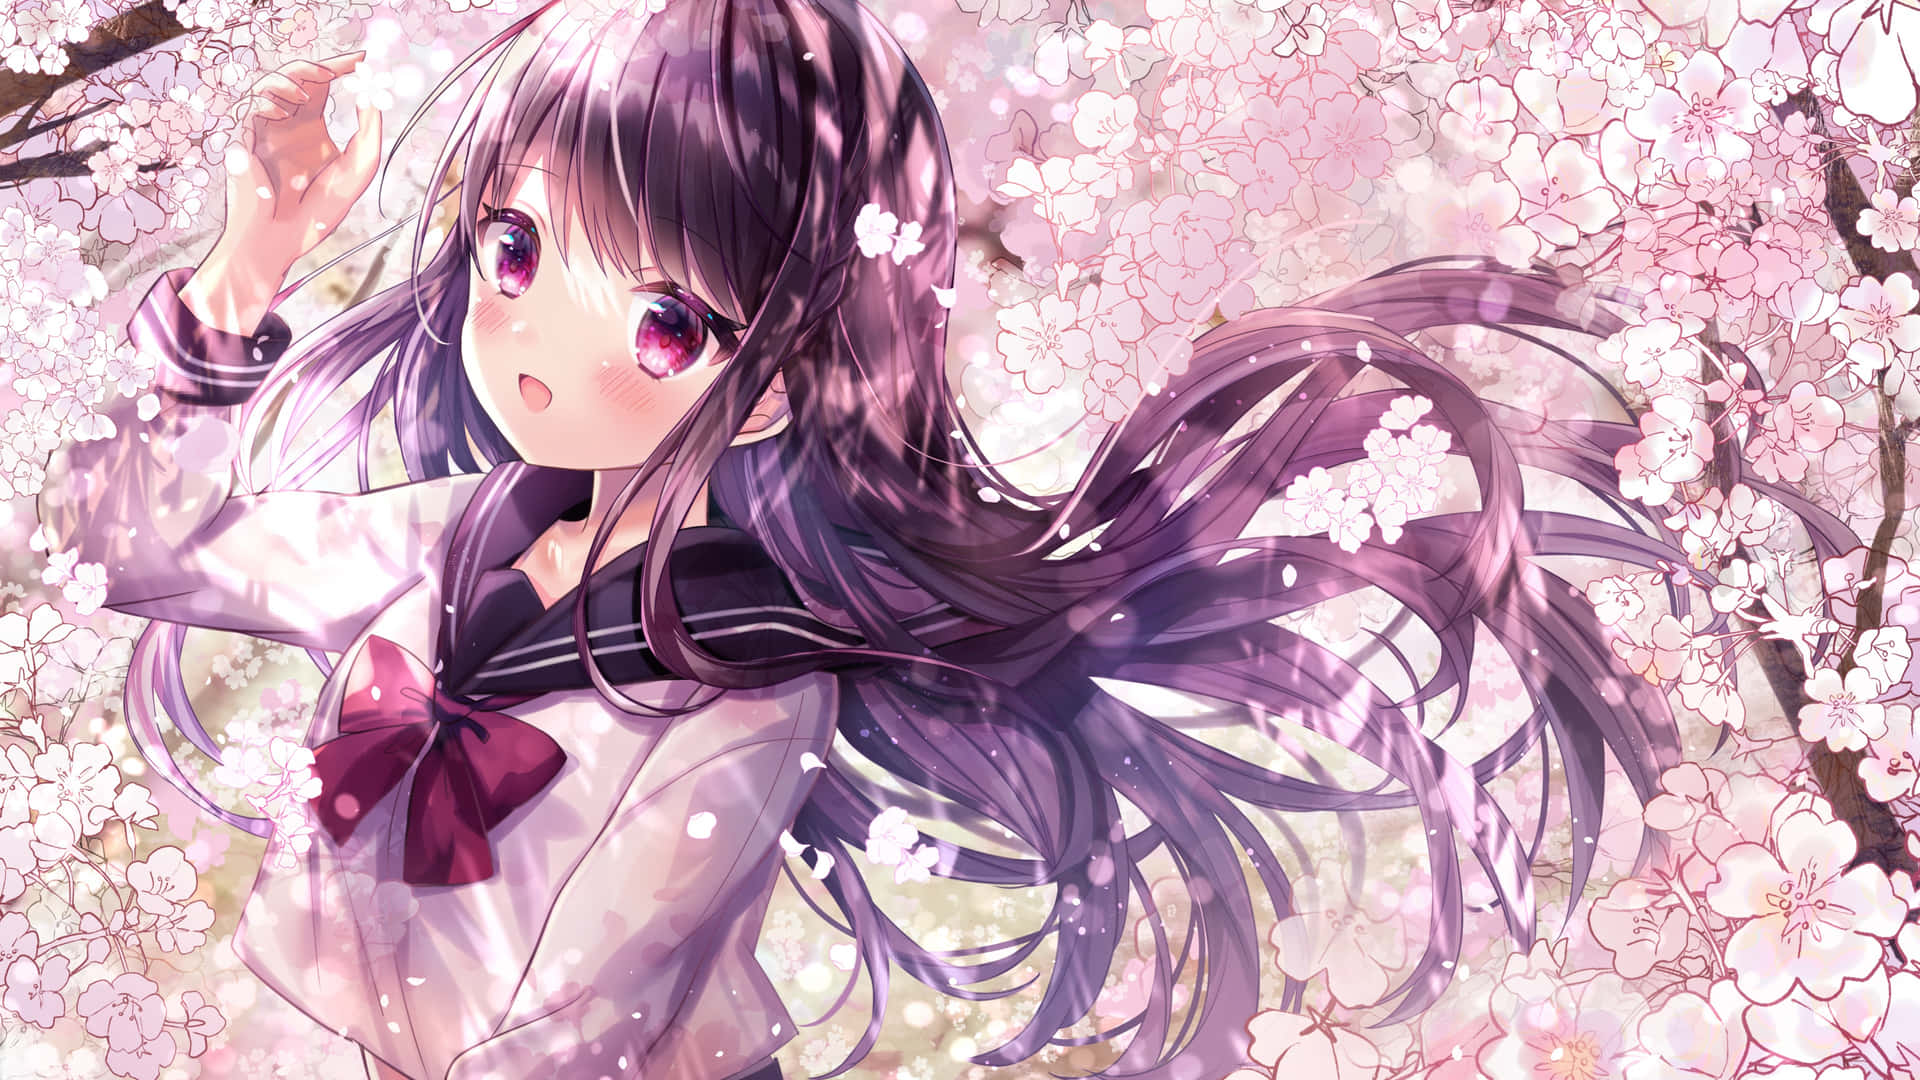 A Girl In A School Uniform With Long Hair And Pink Blossoms Wallpaper